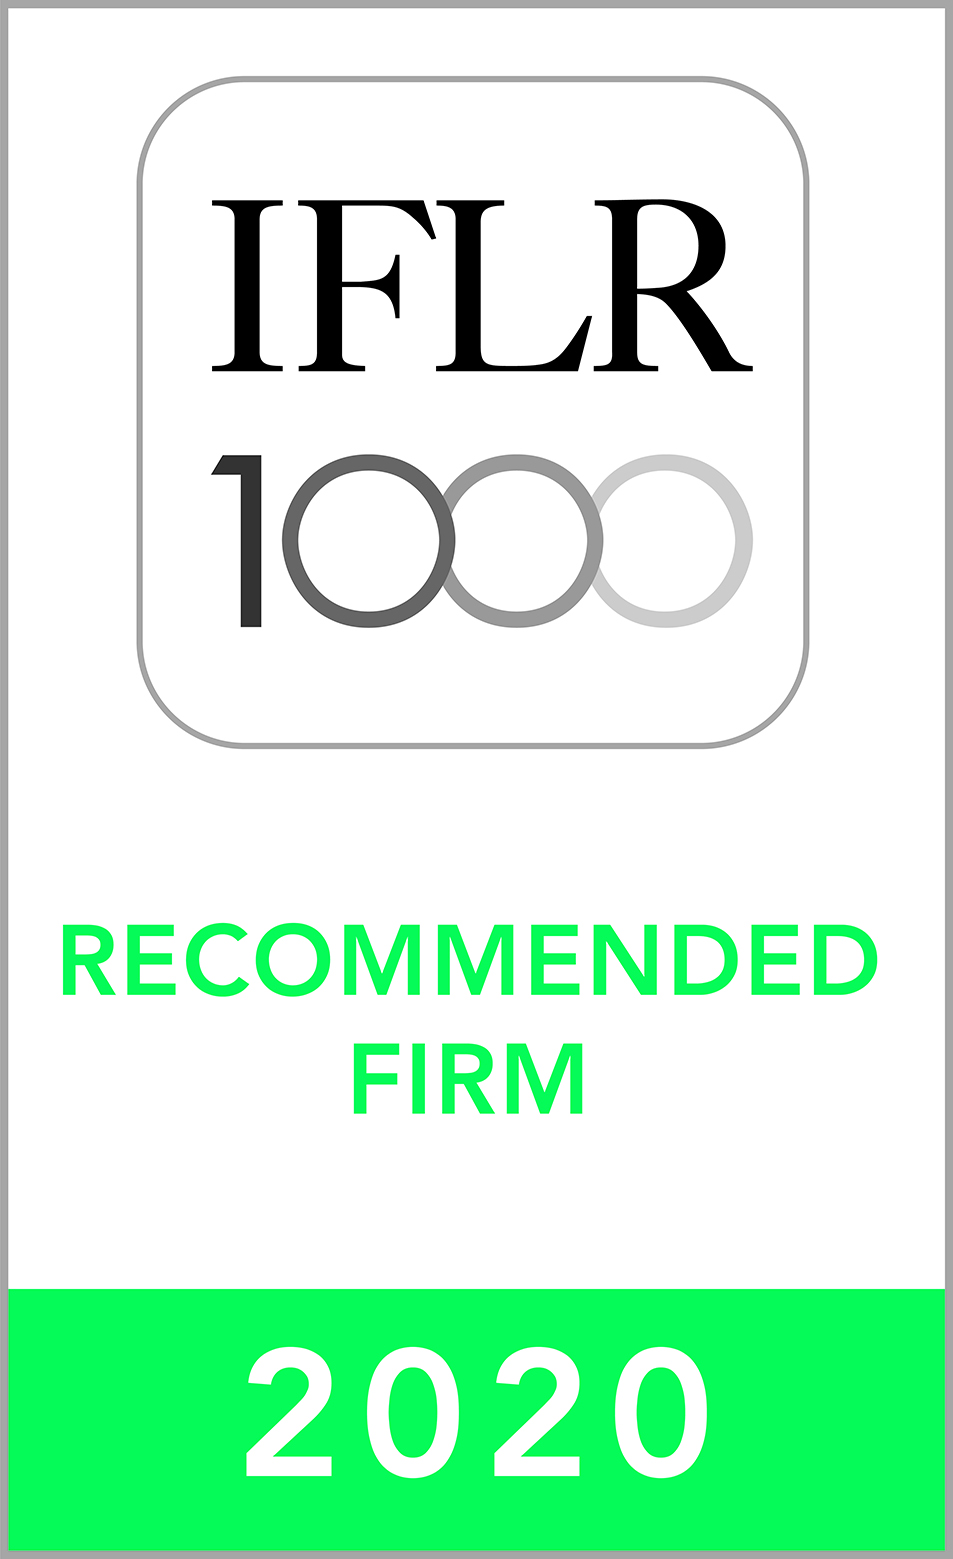 IFLR1000 (2019) Recommended Firm Rosette_2